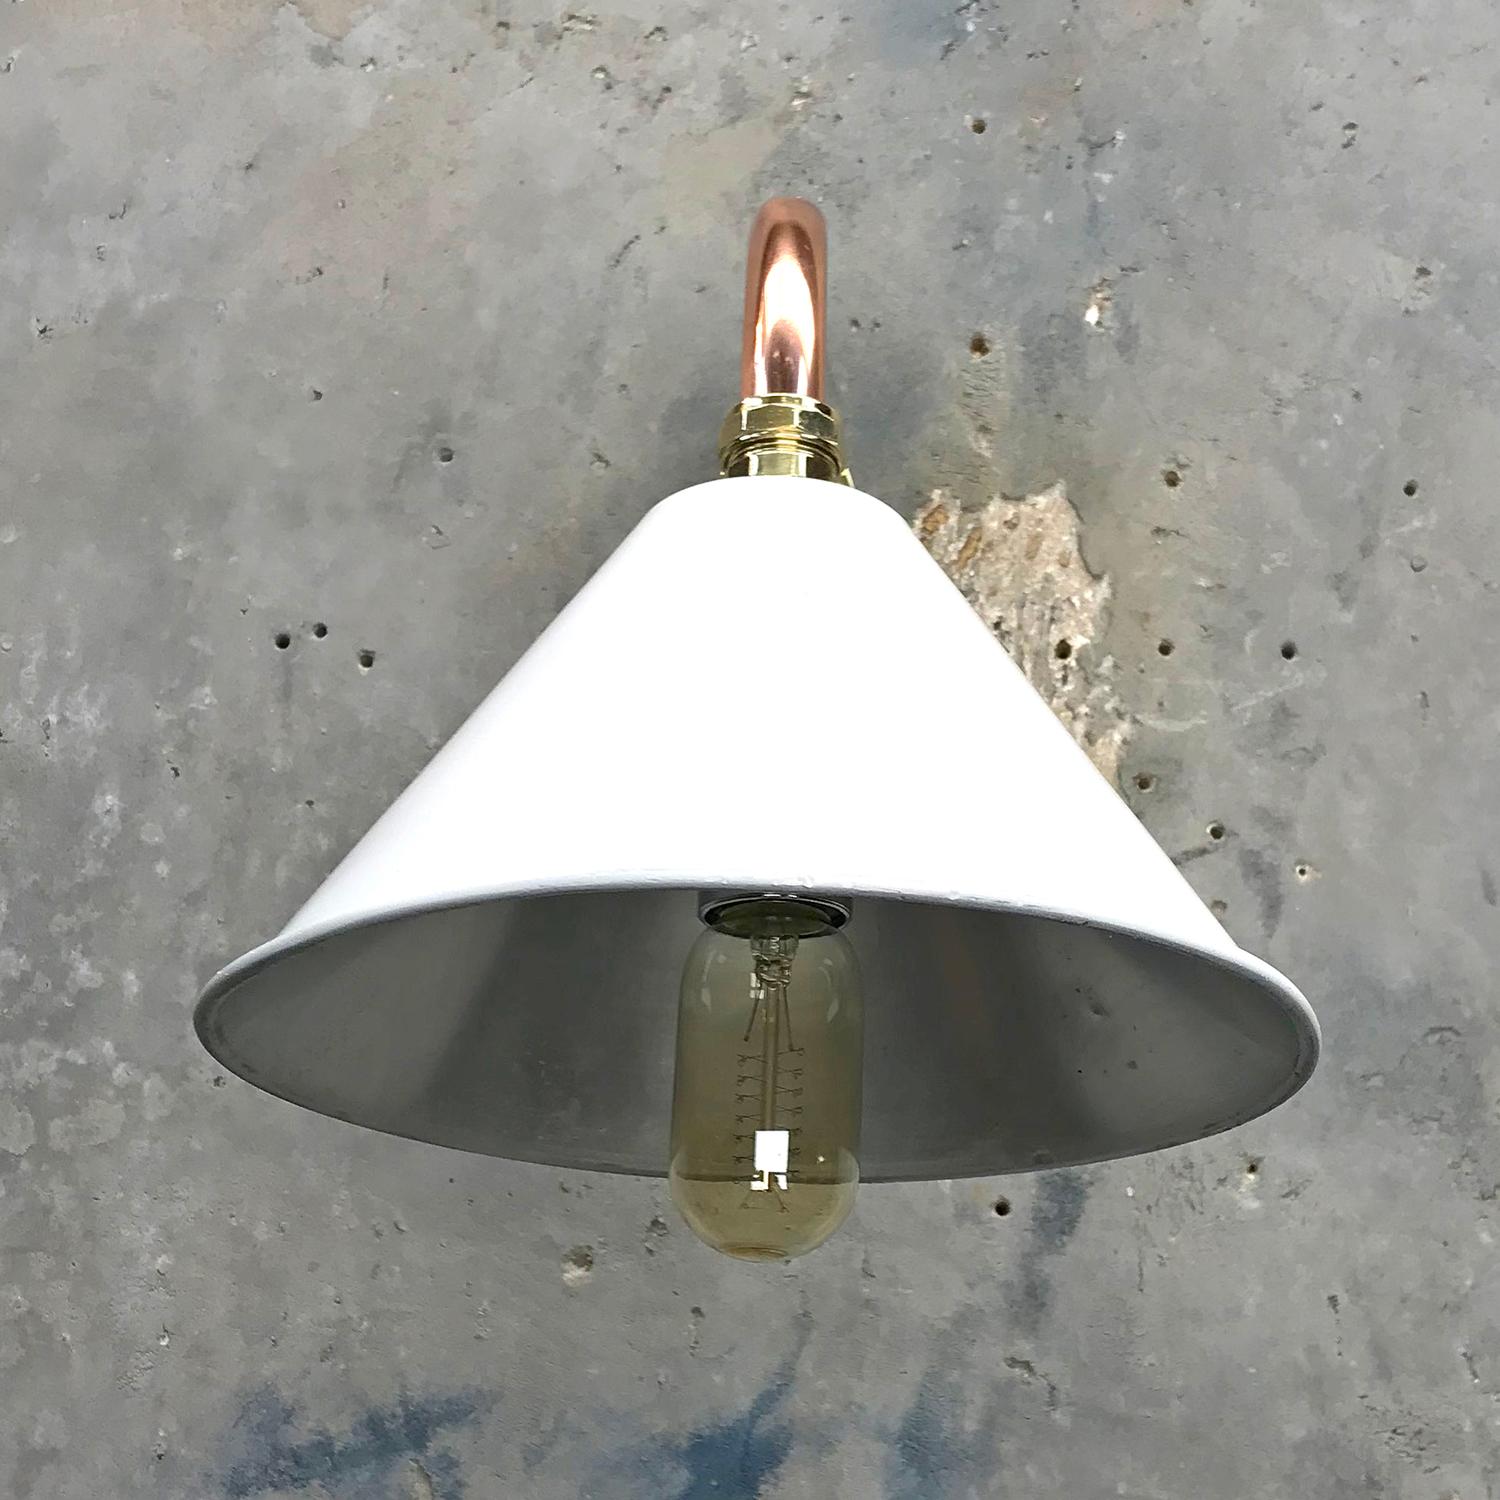 1980s Ex British Army Light Shade / Copper and Brass Cantilever, White In Good Condition For Sale In Leicester, Leicestershire